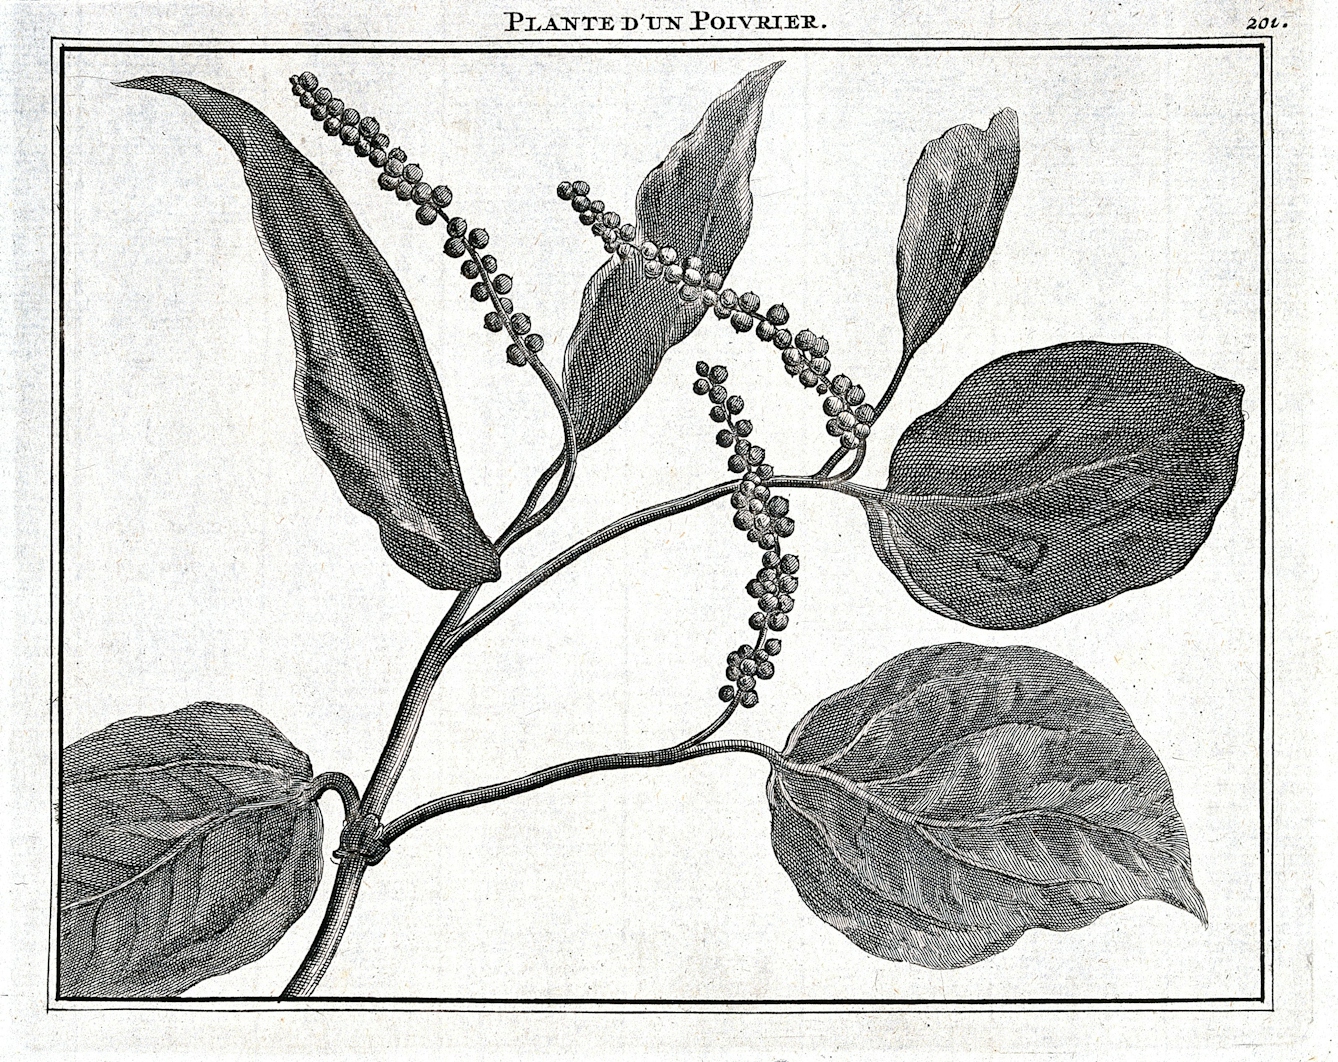 An engraving depicting a fruiting pepper plant.